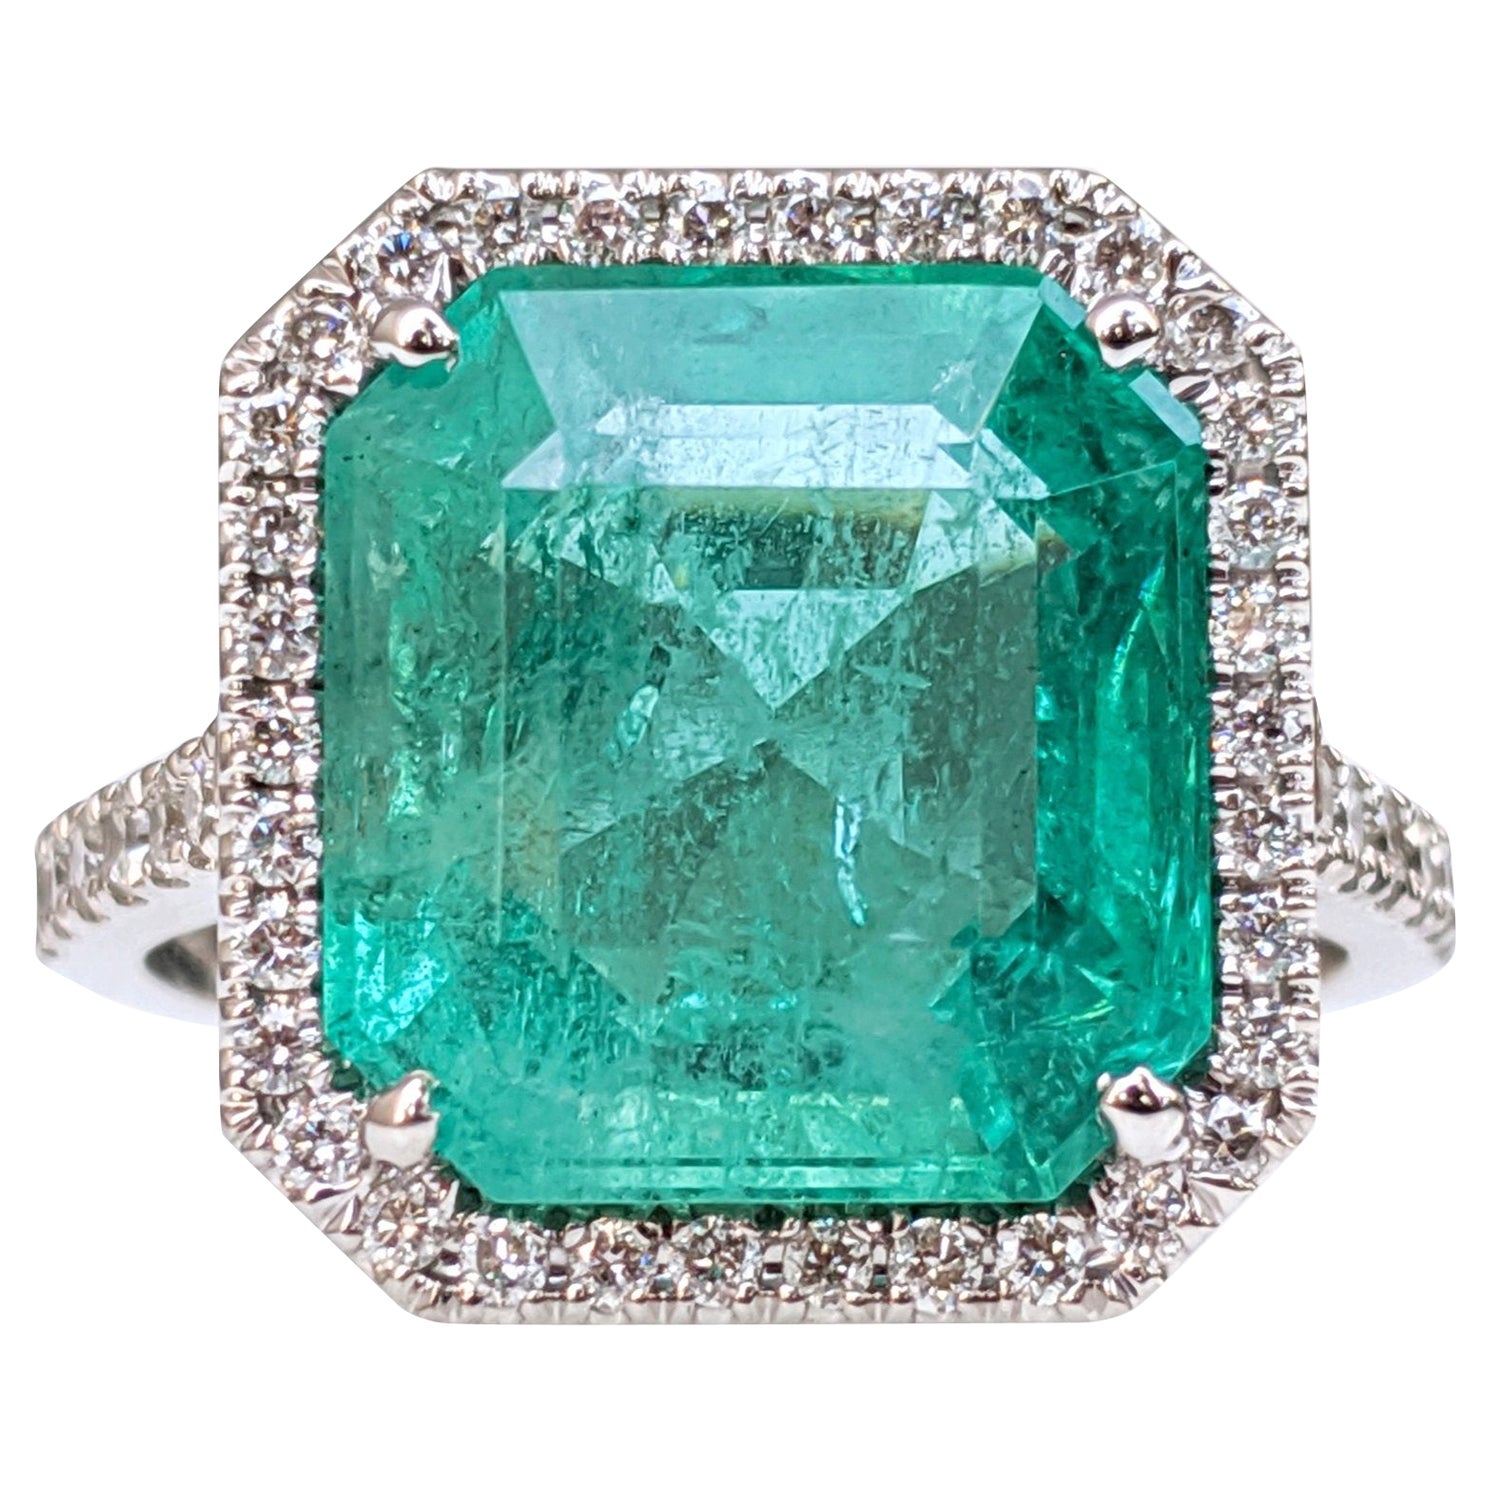 NO RESERVE 8.15Ct Emerald & 0.65Ct D-F Diamonds - 18 kt. White gold - Ring For Sale